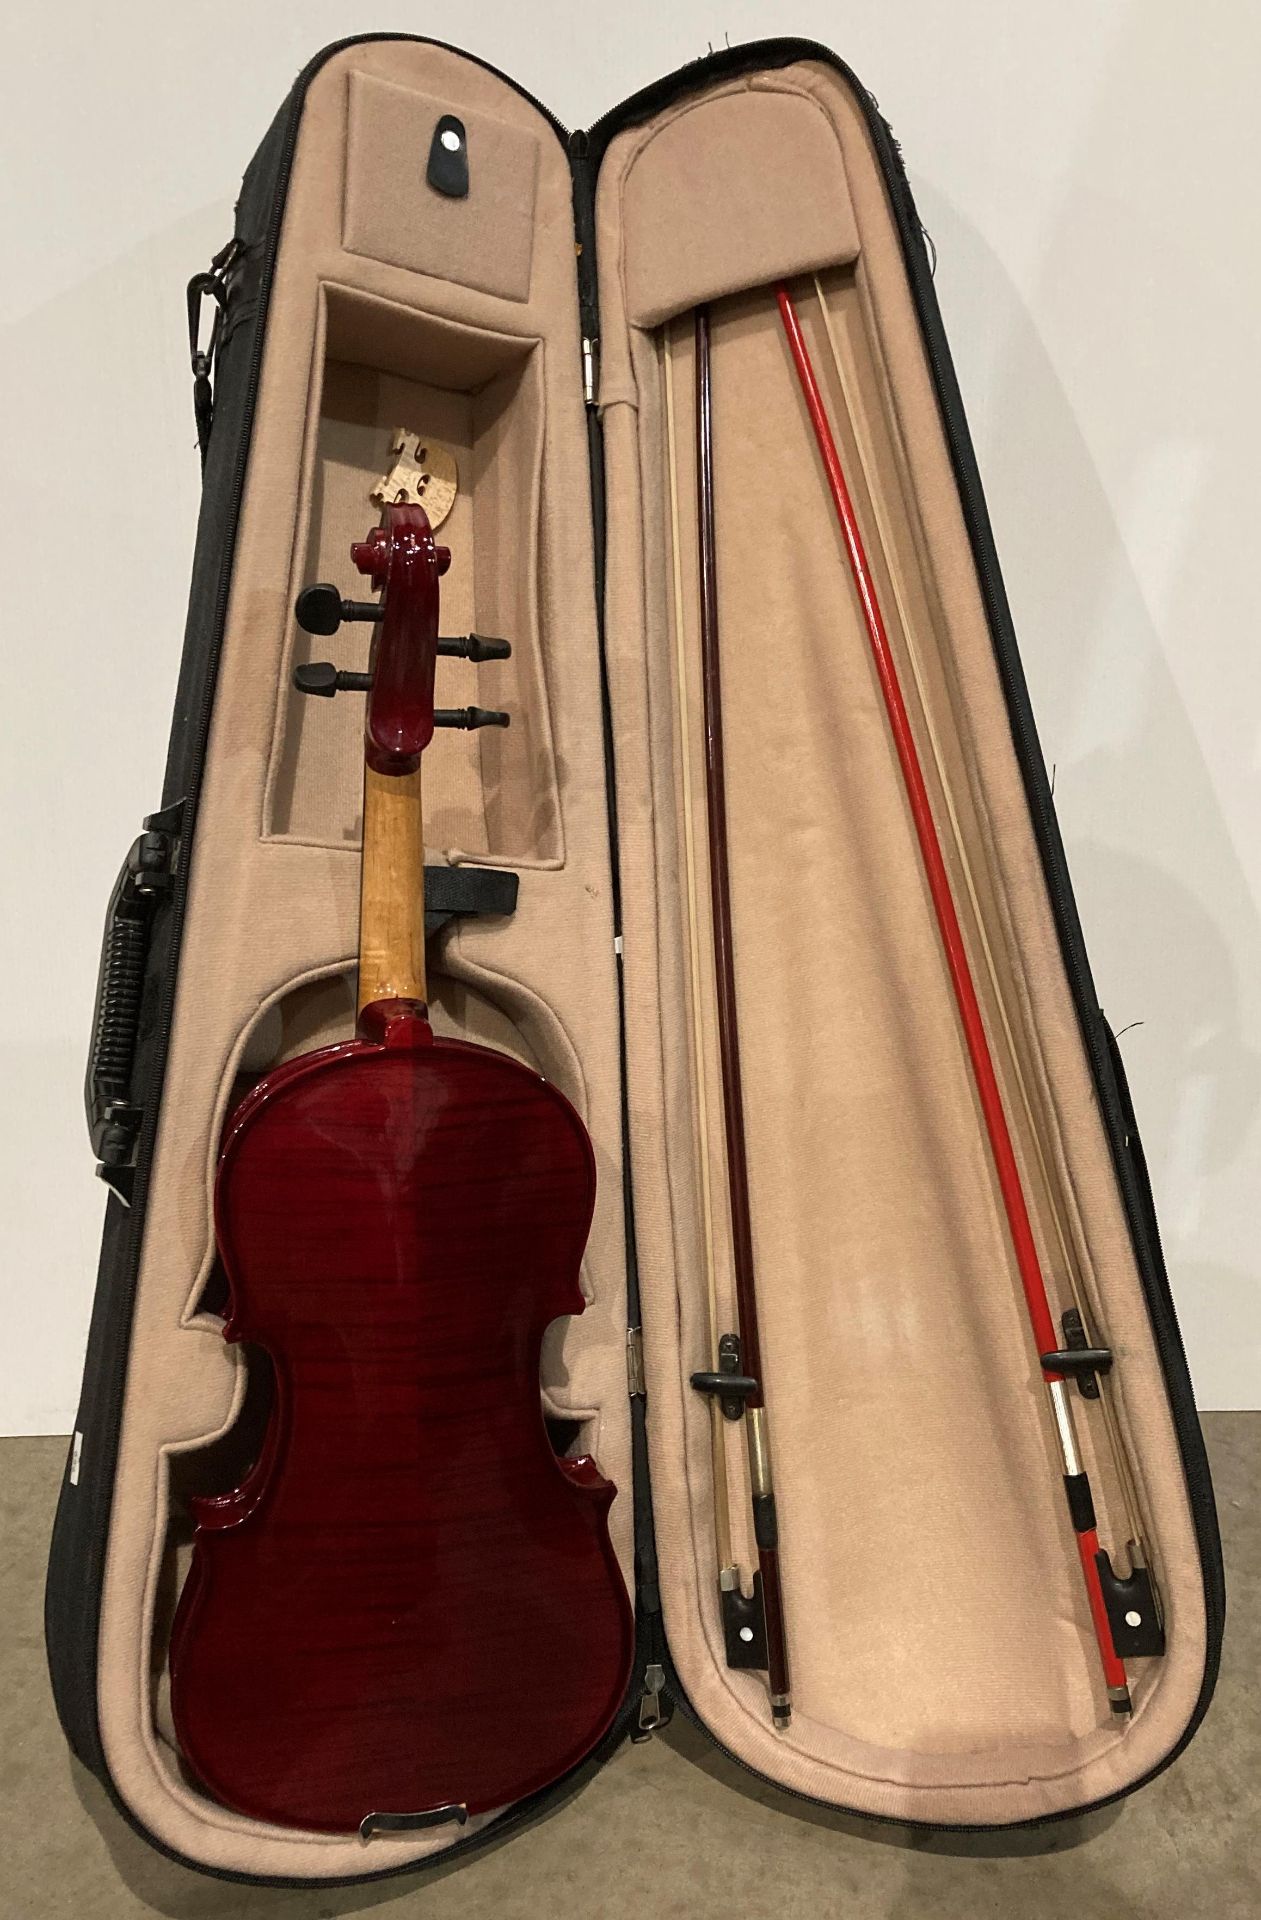 Ashton AV342R violin with two bows in carrying case (Saleroom location: S3) - Image 2 of 3